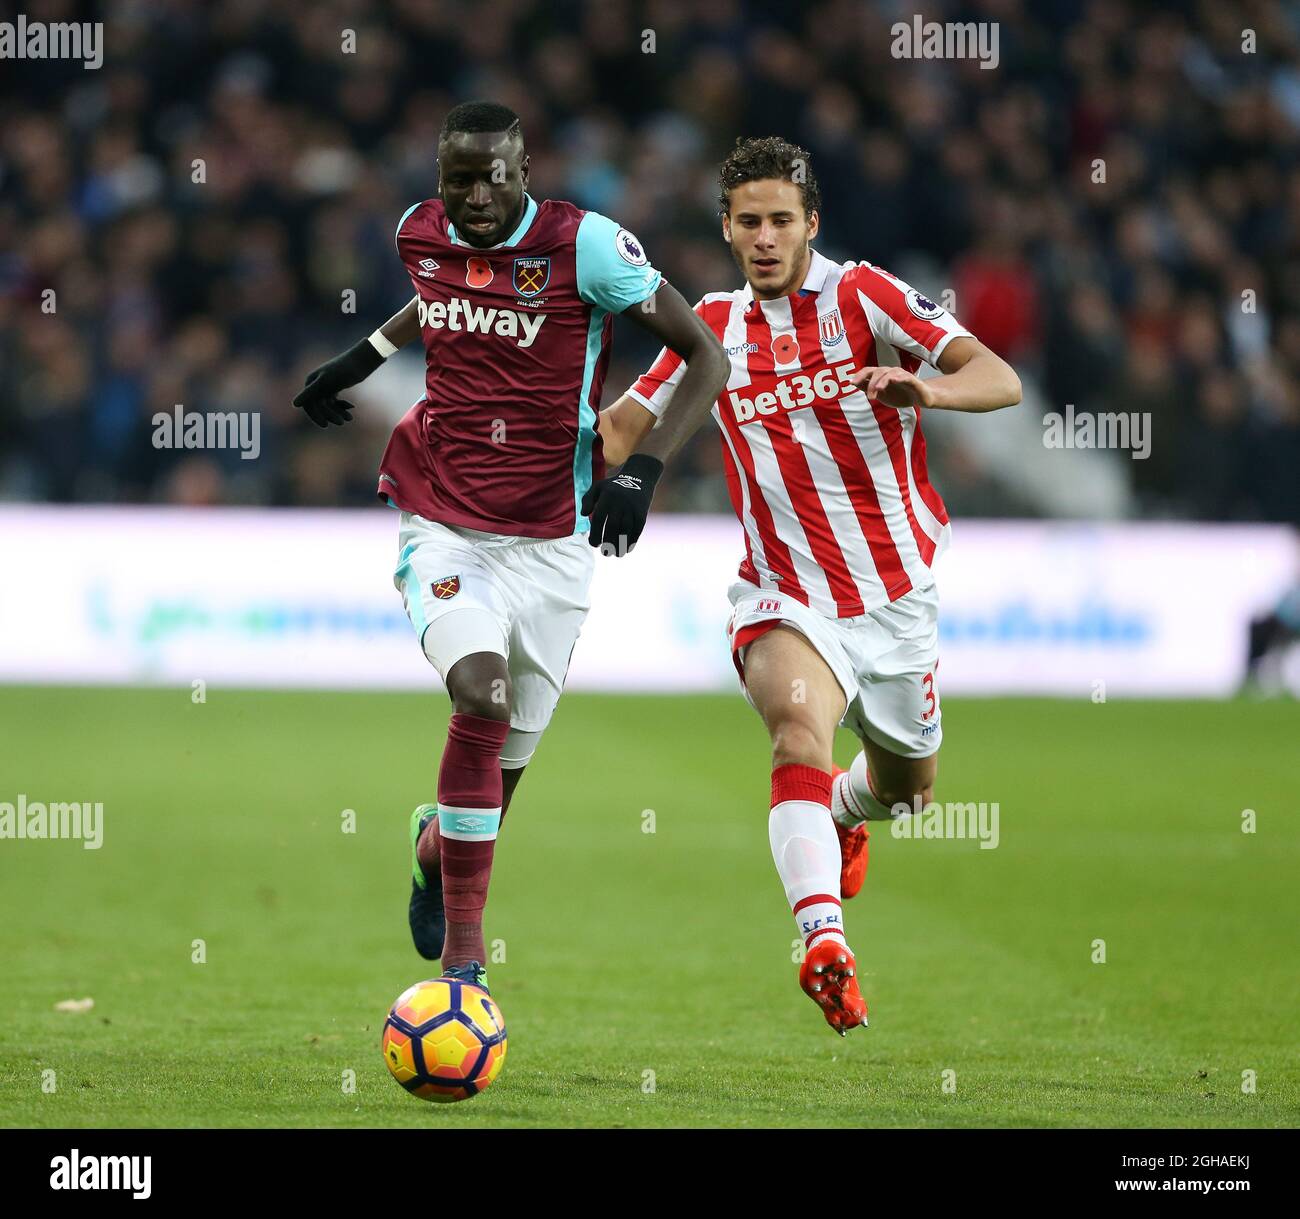 West Ham's Cheikhou Kouyate tussles with Stoke's Ramadan Sobhi during the Premier League match at the London Stadium, London. Picture date November 5th, 2016 Pic David Klein/Sportimage via PA Images Stock Photo